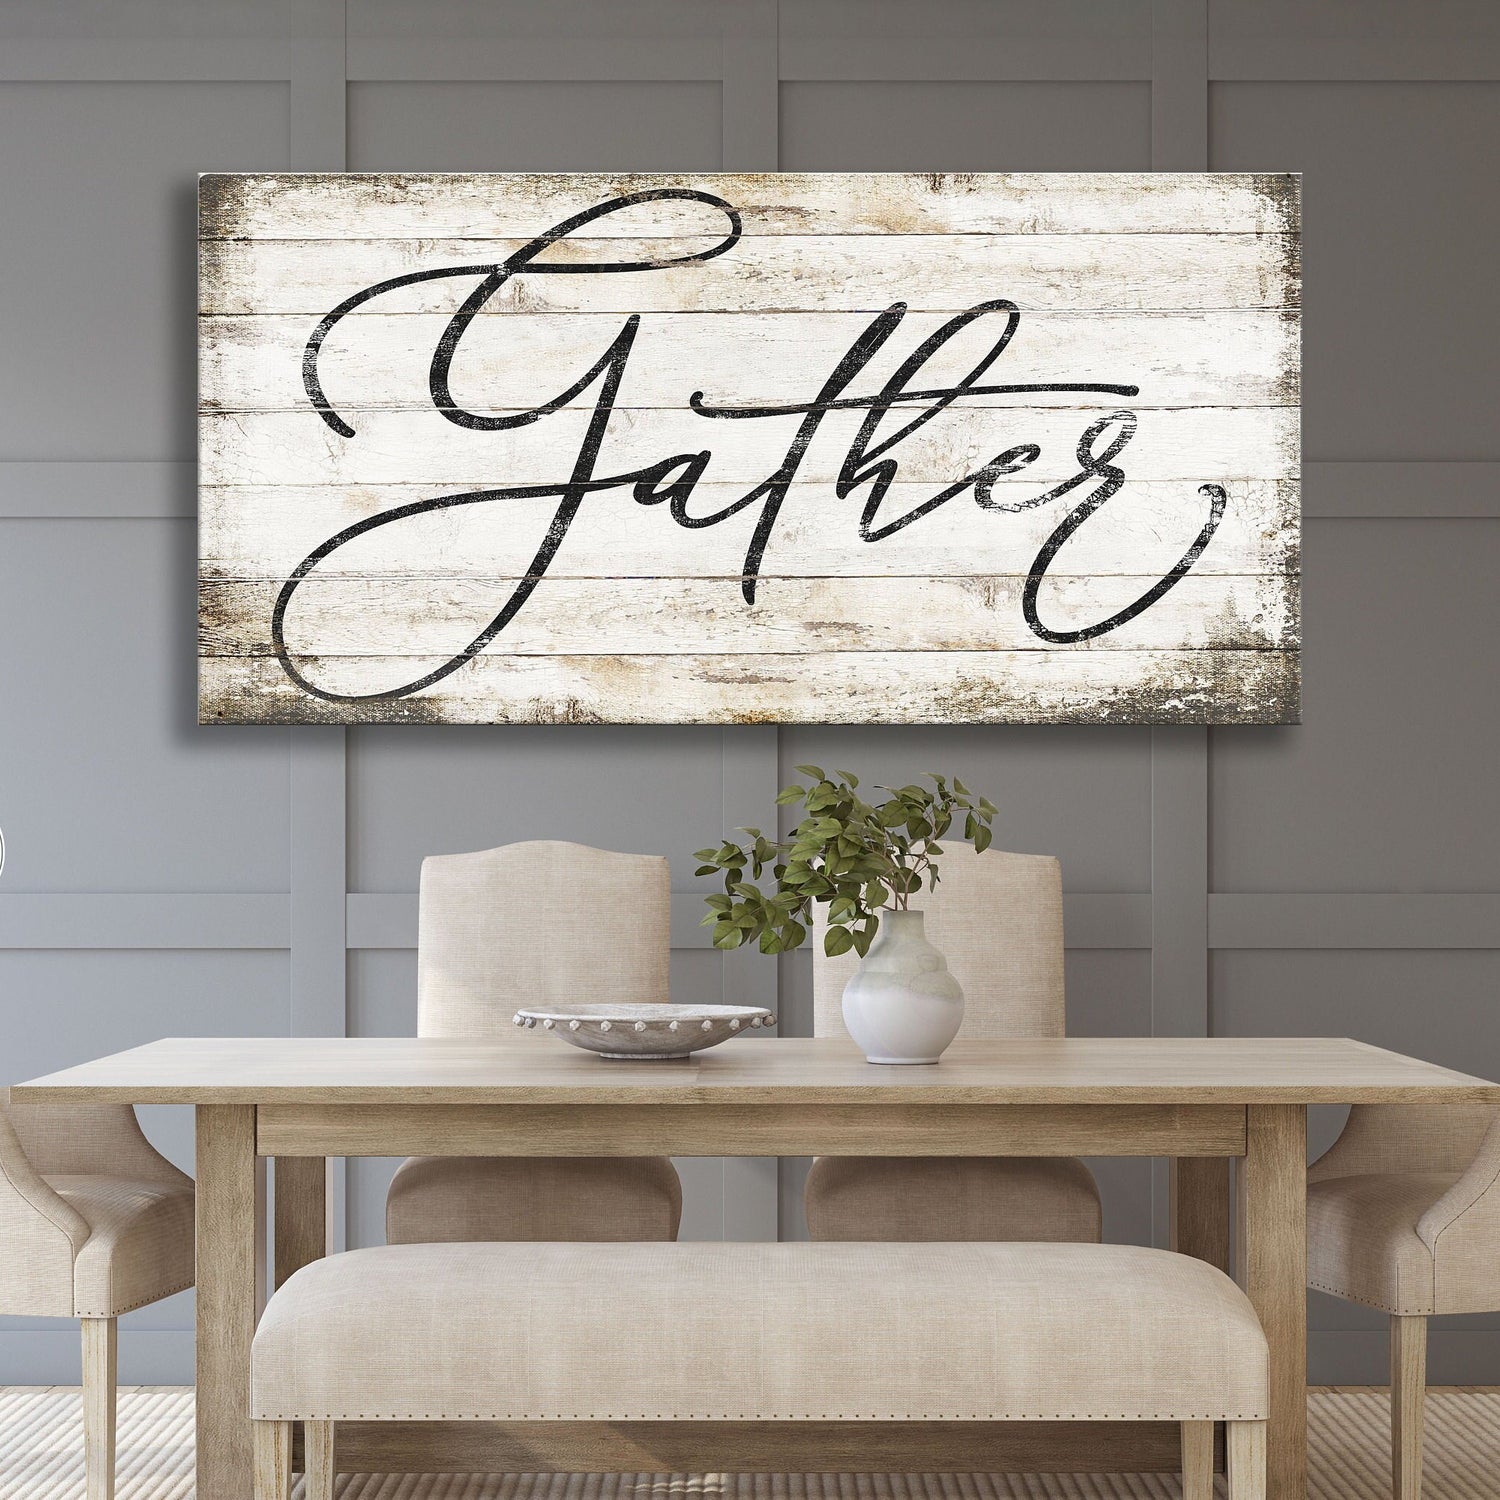 Gather rustic canvas sign